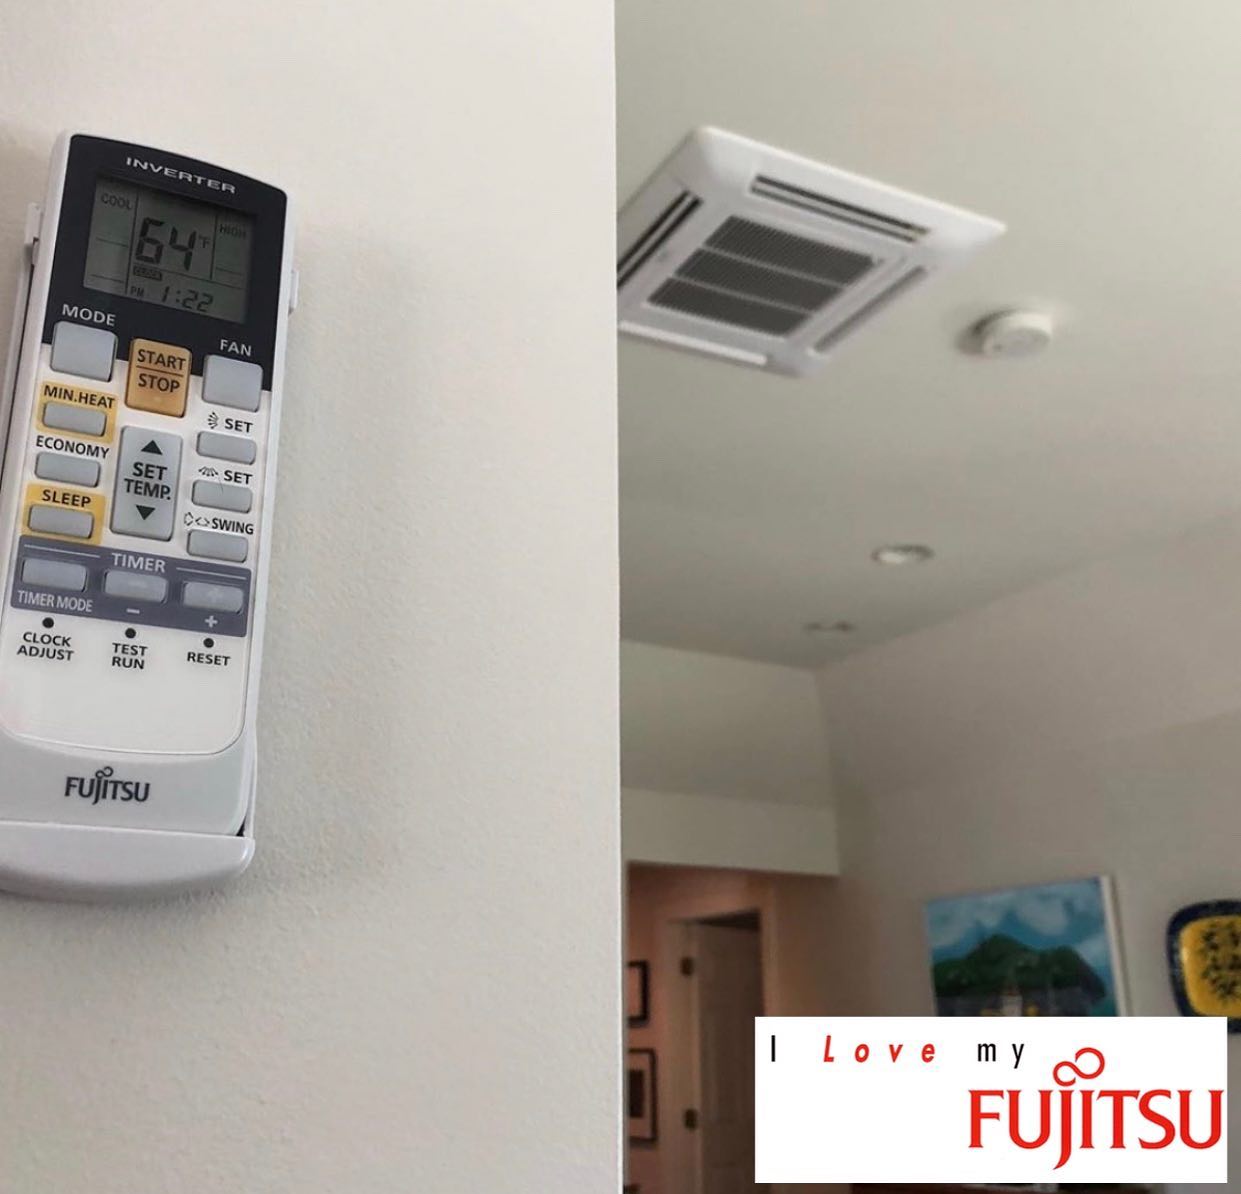 Fujitsu comfort all summer long. 
With Ceiling Cassette, Wall Mount, Floor Mount, Ceiling Suspended and Ducted options, Fujitsu has the right system for all Hawaii homes and businesses.  Visit www.Ilovemyfujitsu.com to find a Fujitsu dealer in Hawaii.
#oahuhvac #mauihvac #kauaihvac #konahvac #hawaiihvac #hawaiihvaccontractor #hawaiihvacsuperstore #hvac #hvacdesign #hvacquality #hvaclife #hvactechnician #hvacowner #hvacpro #hvacinstall #hvaccontractor #hvacinstallation #airconditioninginstallation #airconditioningcontractor #facilitymanagement #propertymanagement #hawaiihotel #builders #developers #construction